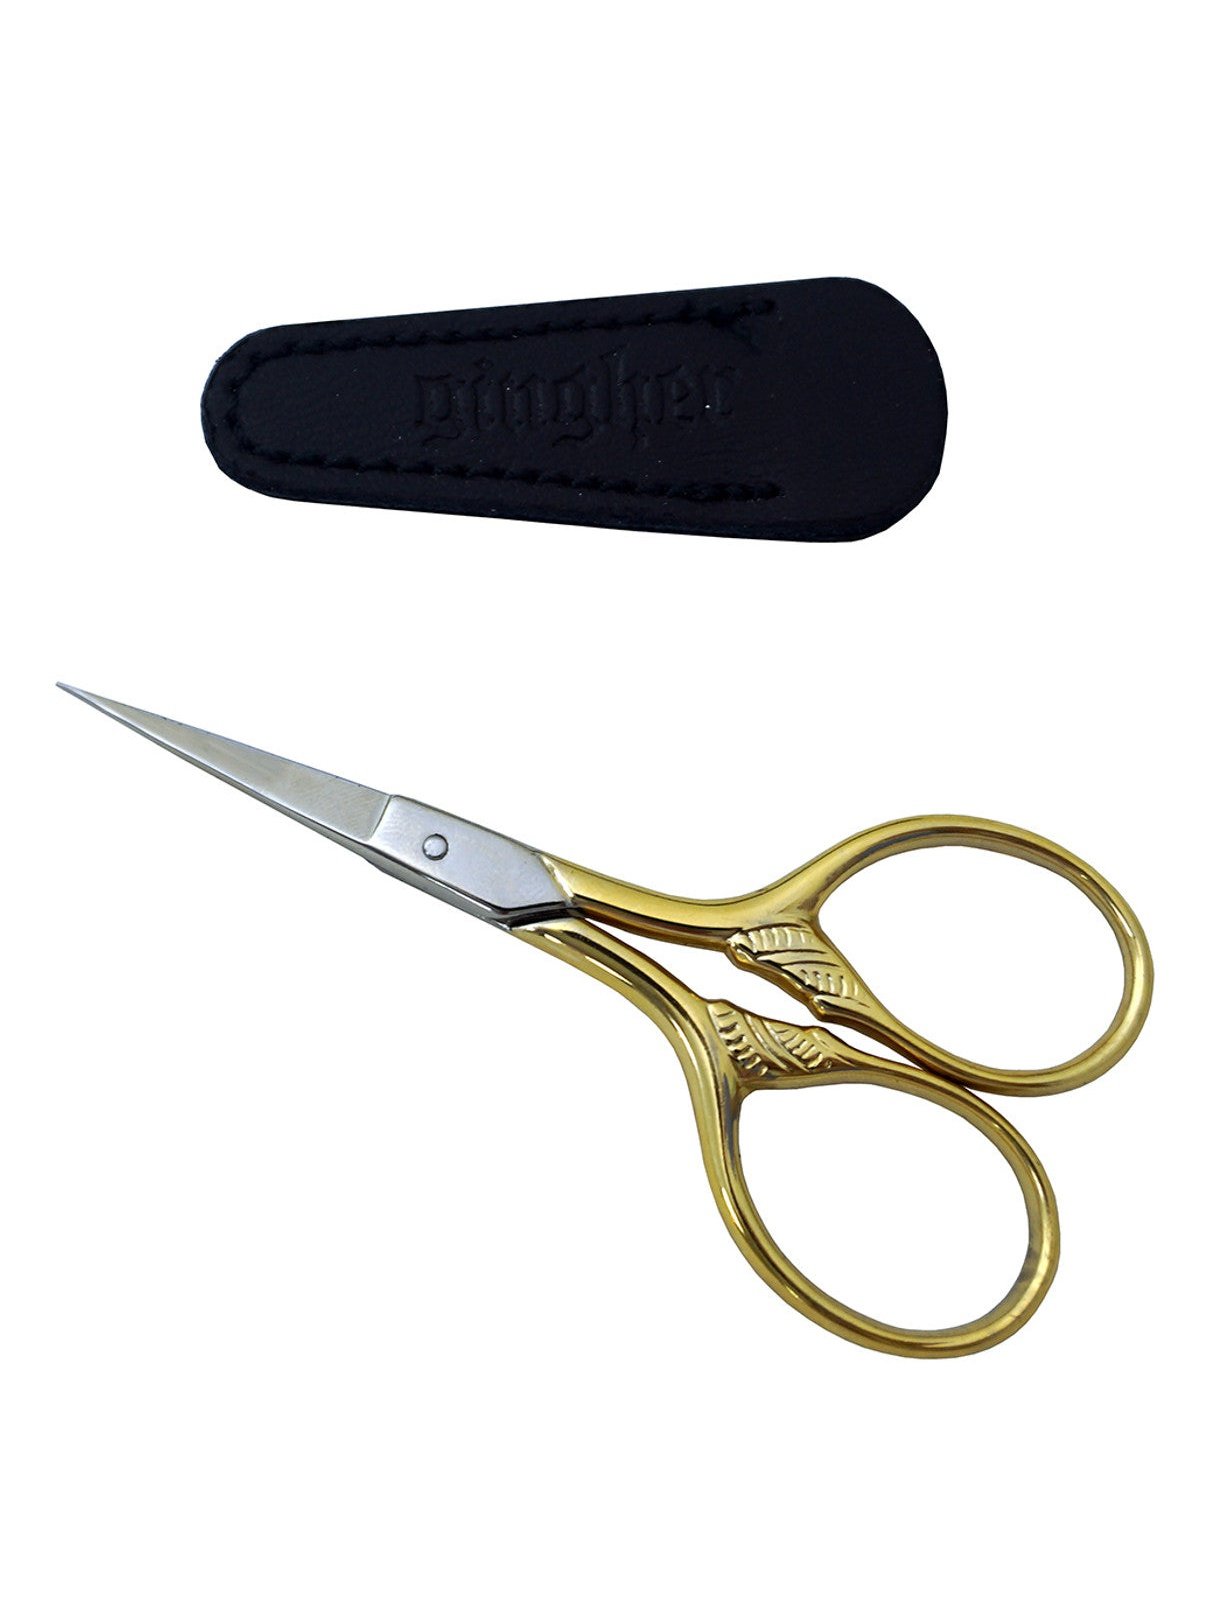 Gingher Gold Lions Tail Embroidery Scissors 3 1/2"